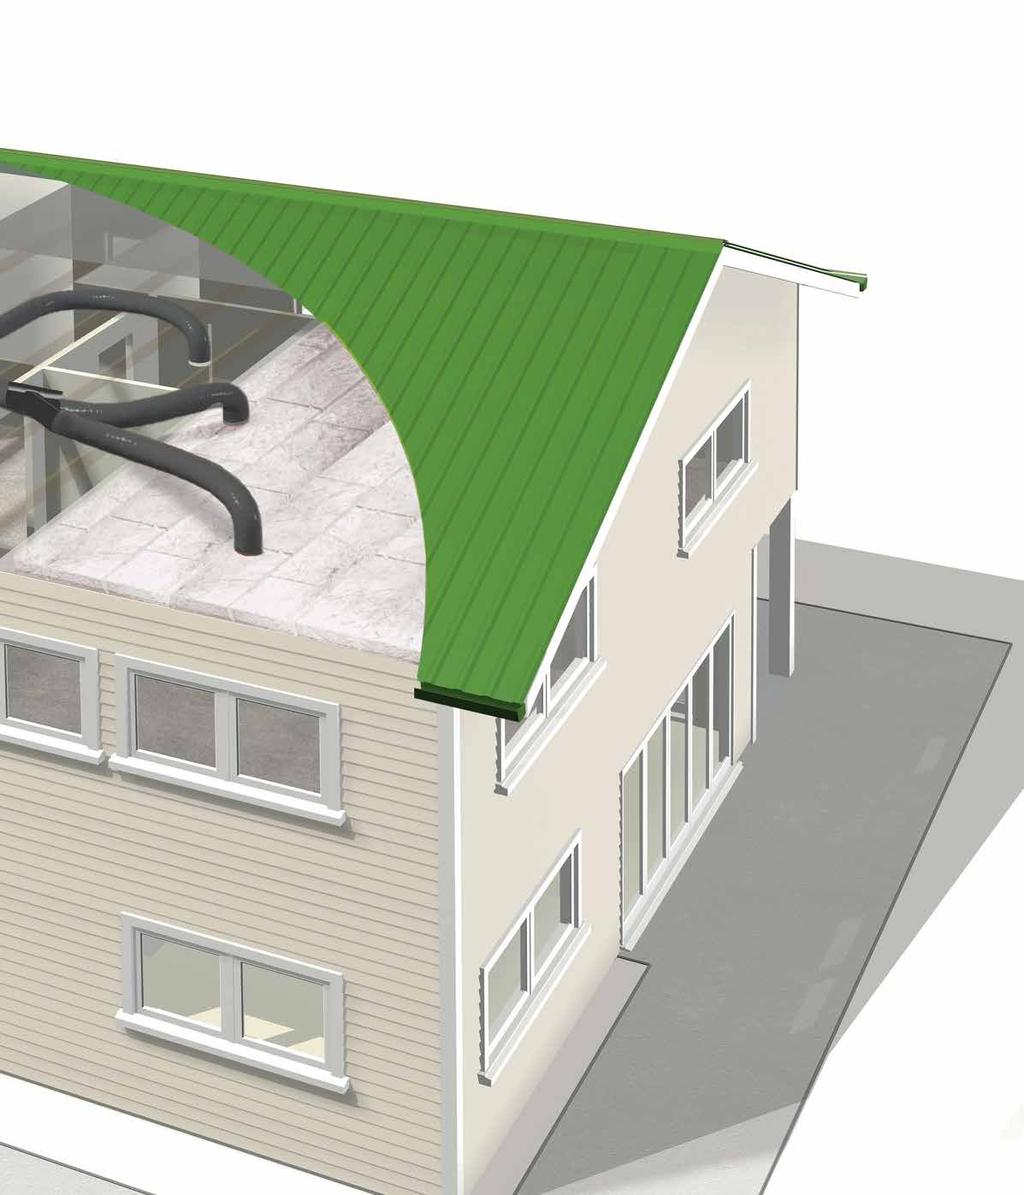 NZ s Home Ventilation Specialists A Heat Transfer upgrade makes better use of your heating in winter. Excess heat from a source room is transferred to other rooms in your house.